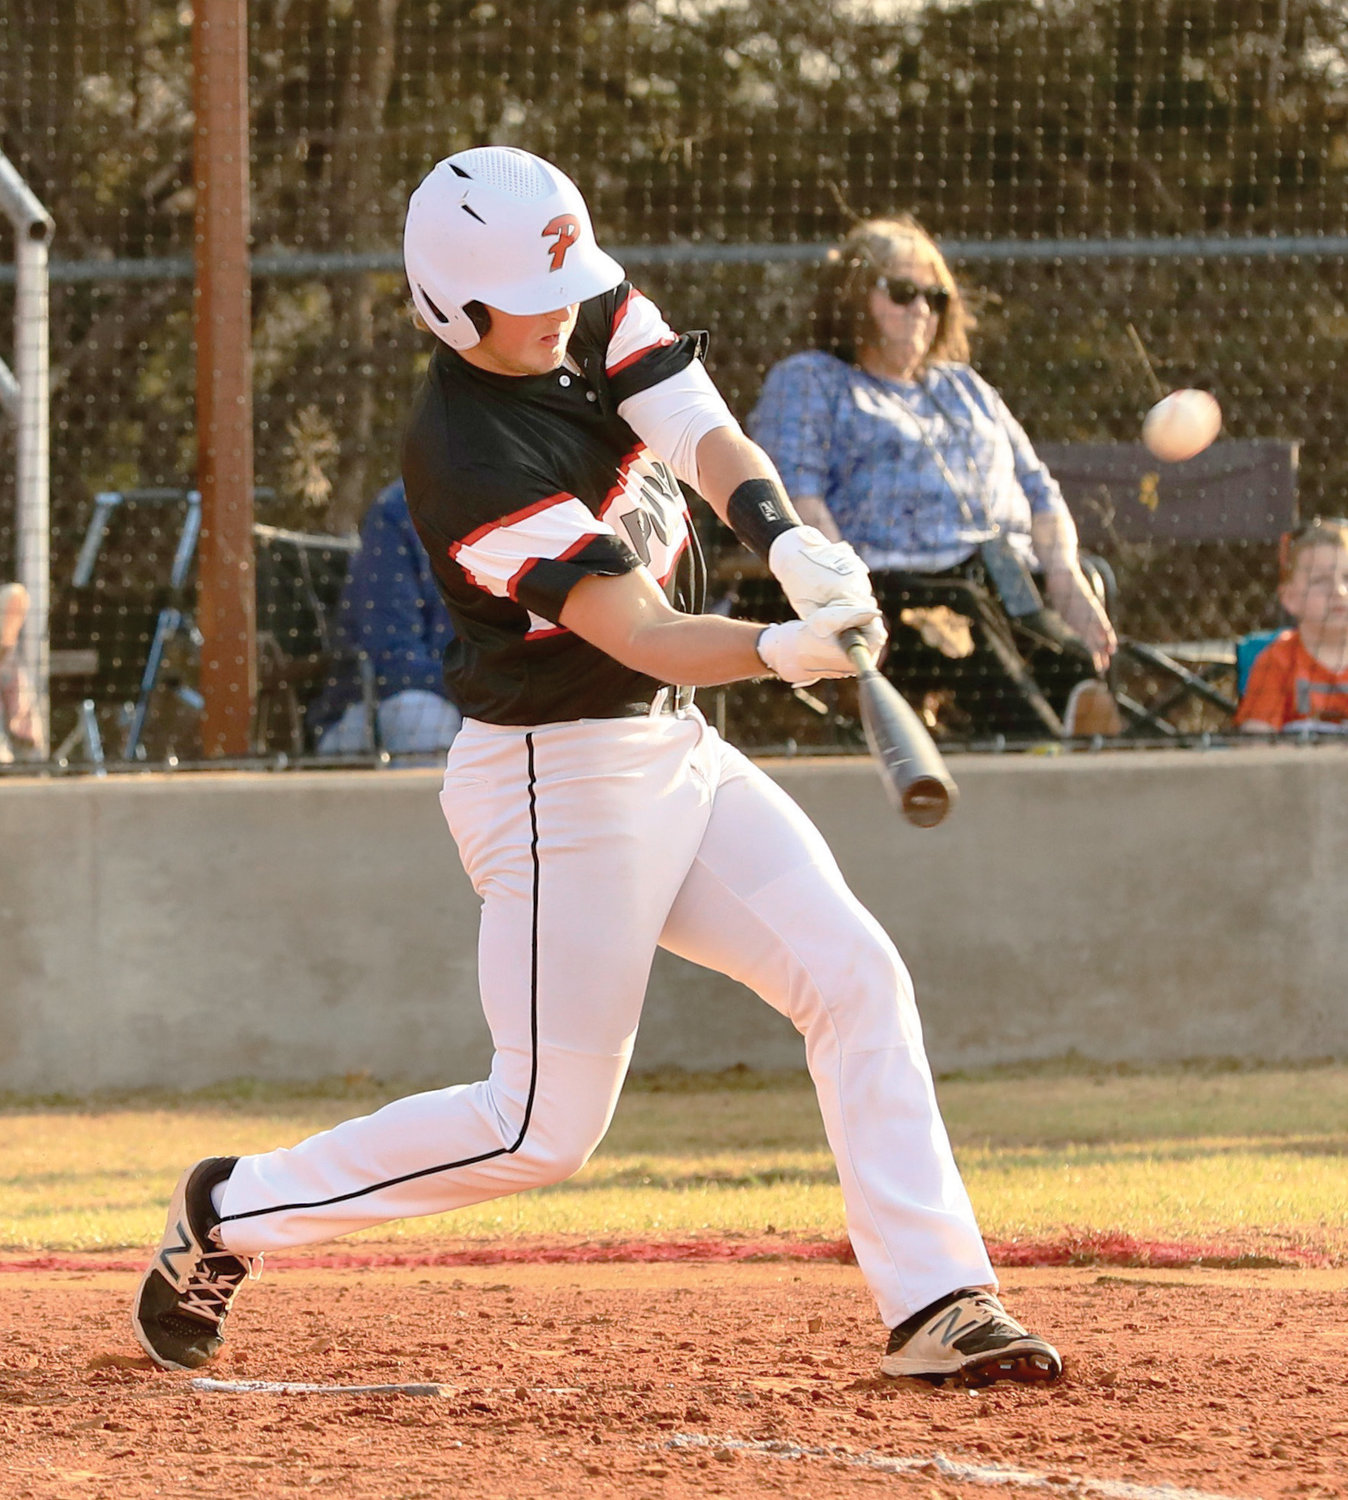 Purcell senior Creed Smith smacks a home run in the first inning against Noble Friday. The Dragons lost 9-1.